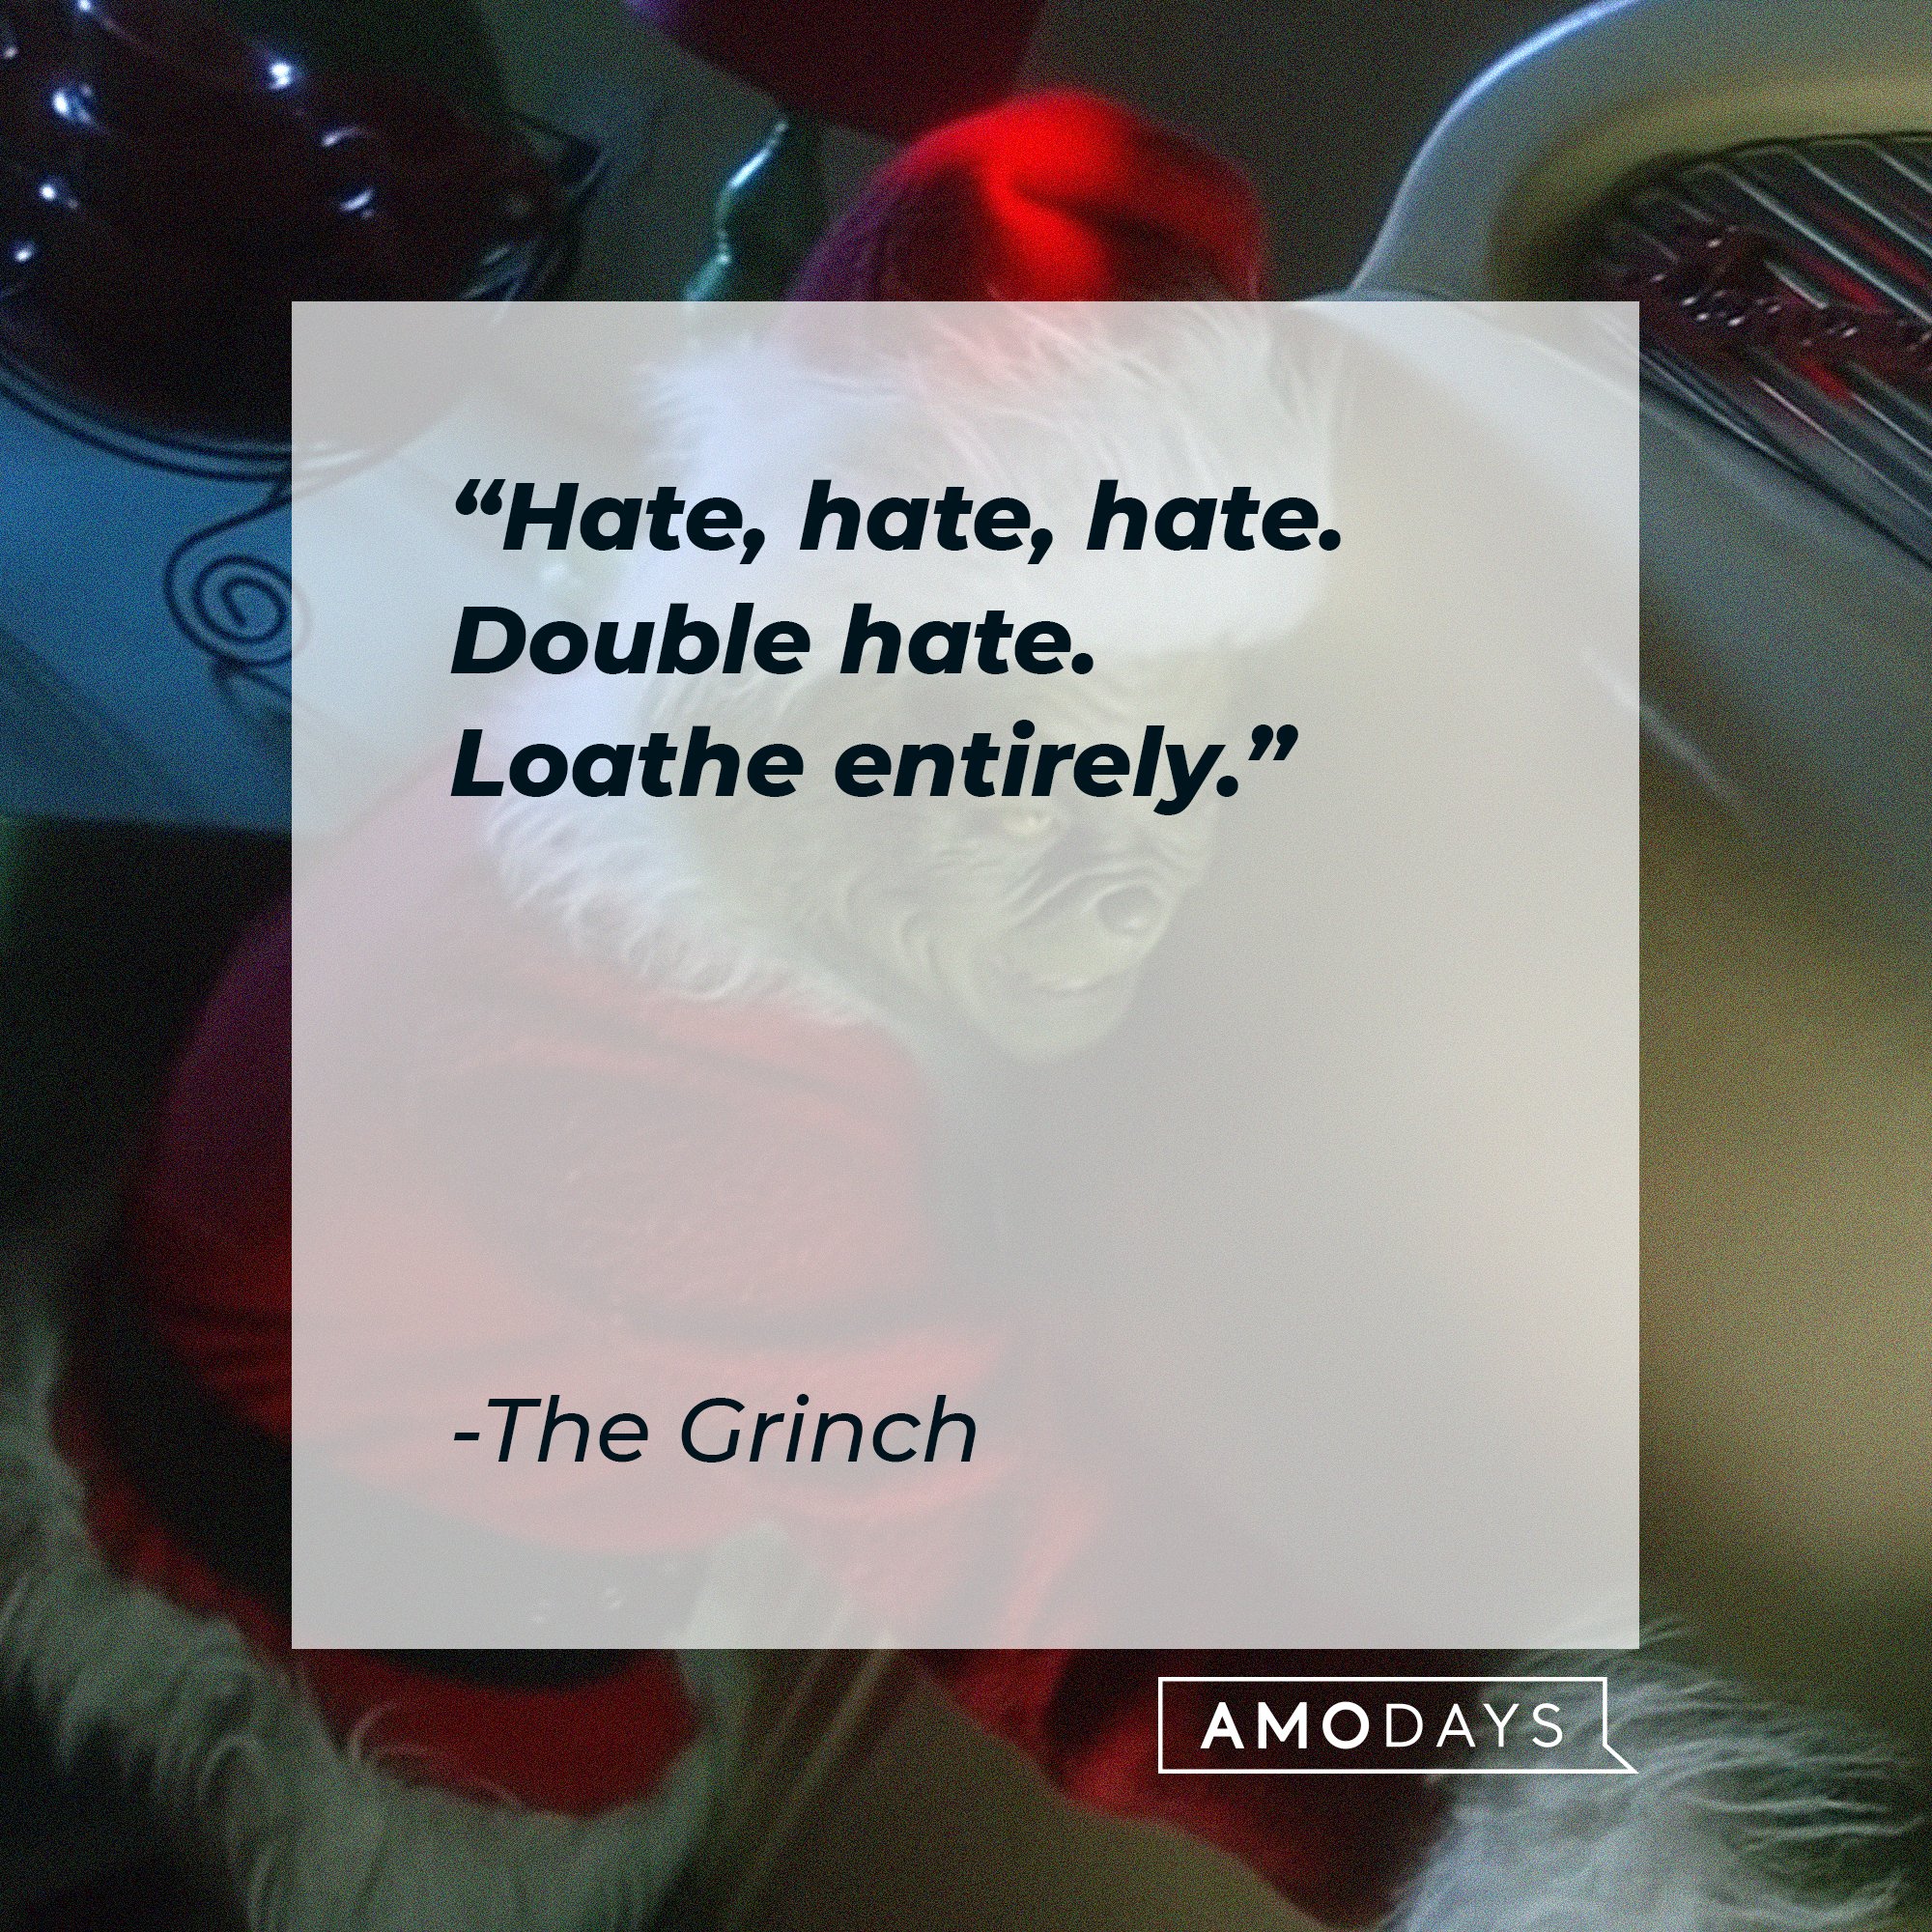 The Grinch’s quote: "Hate, hate, hate. Double hate. Loathe entirely." | Image: AmoDays